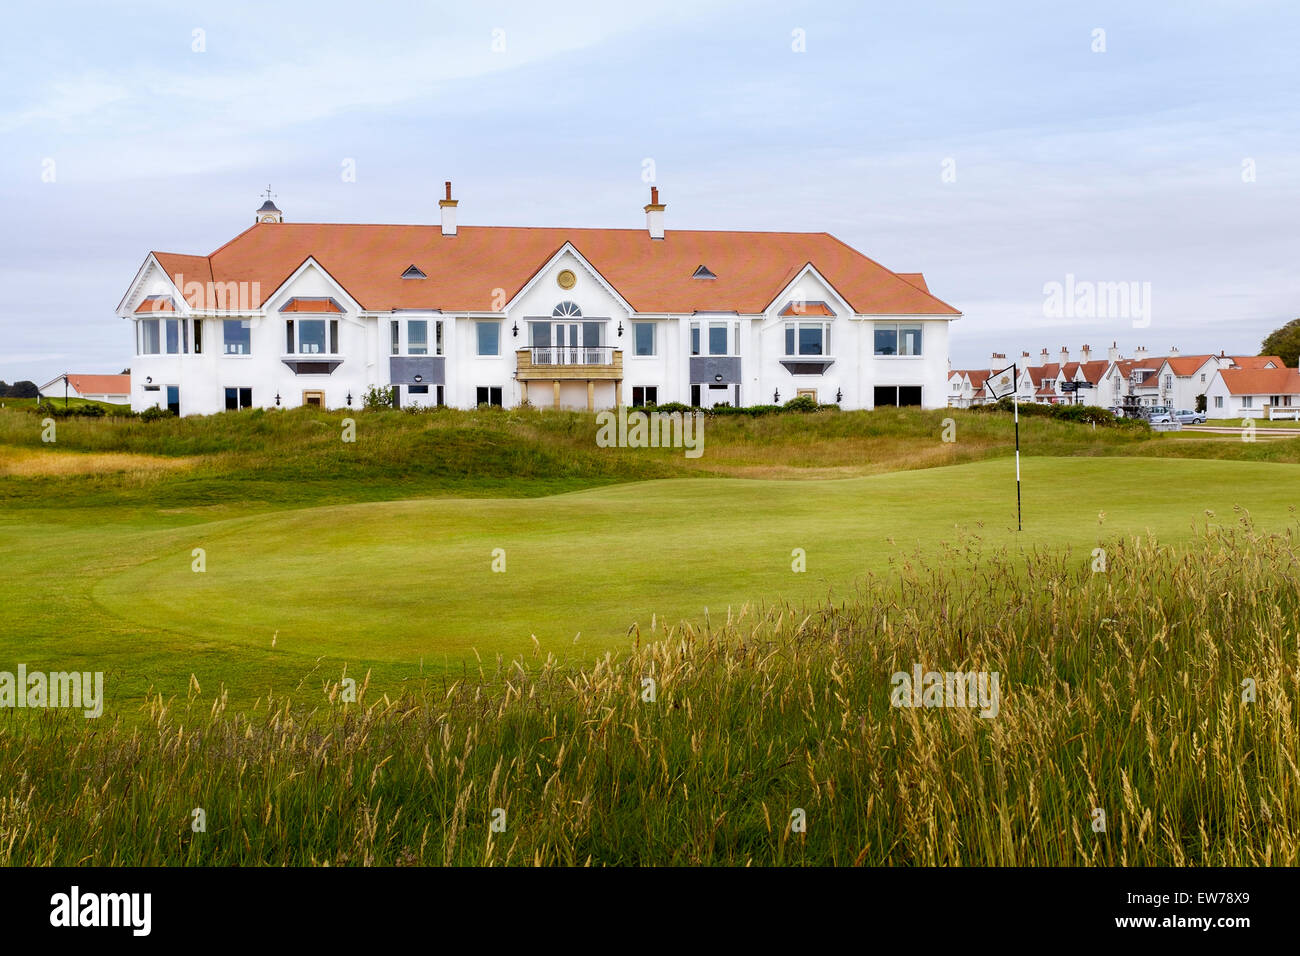 Trump Turnberry Golf clubhouse overlooking the 18th green on the Ailsa Championship course, Turnberry, Ayrshire, Scotland, UK Stock Photo